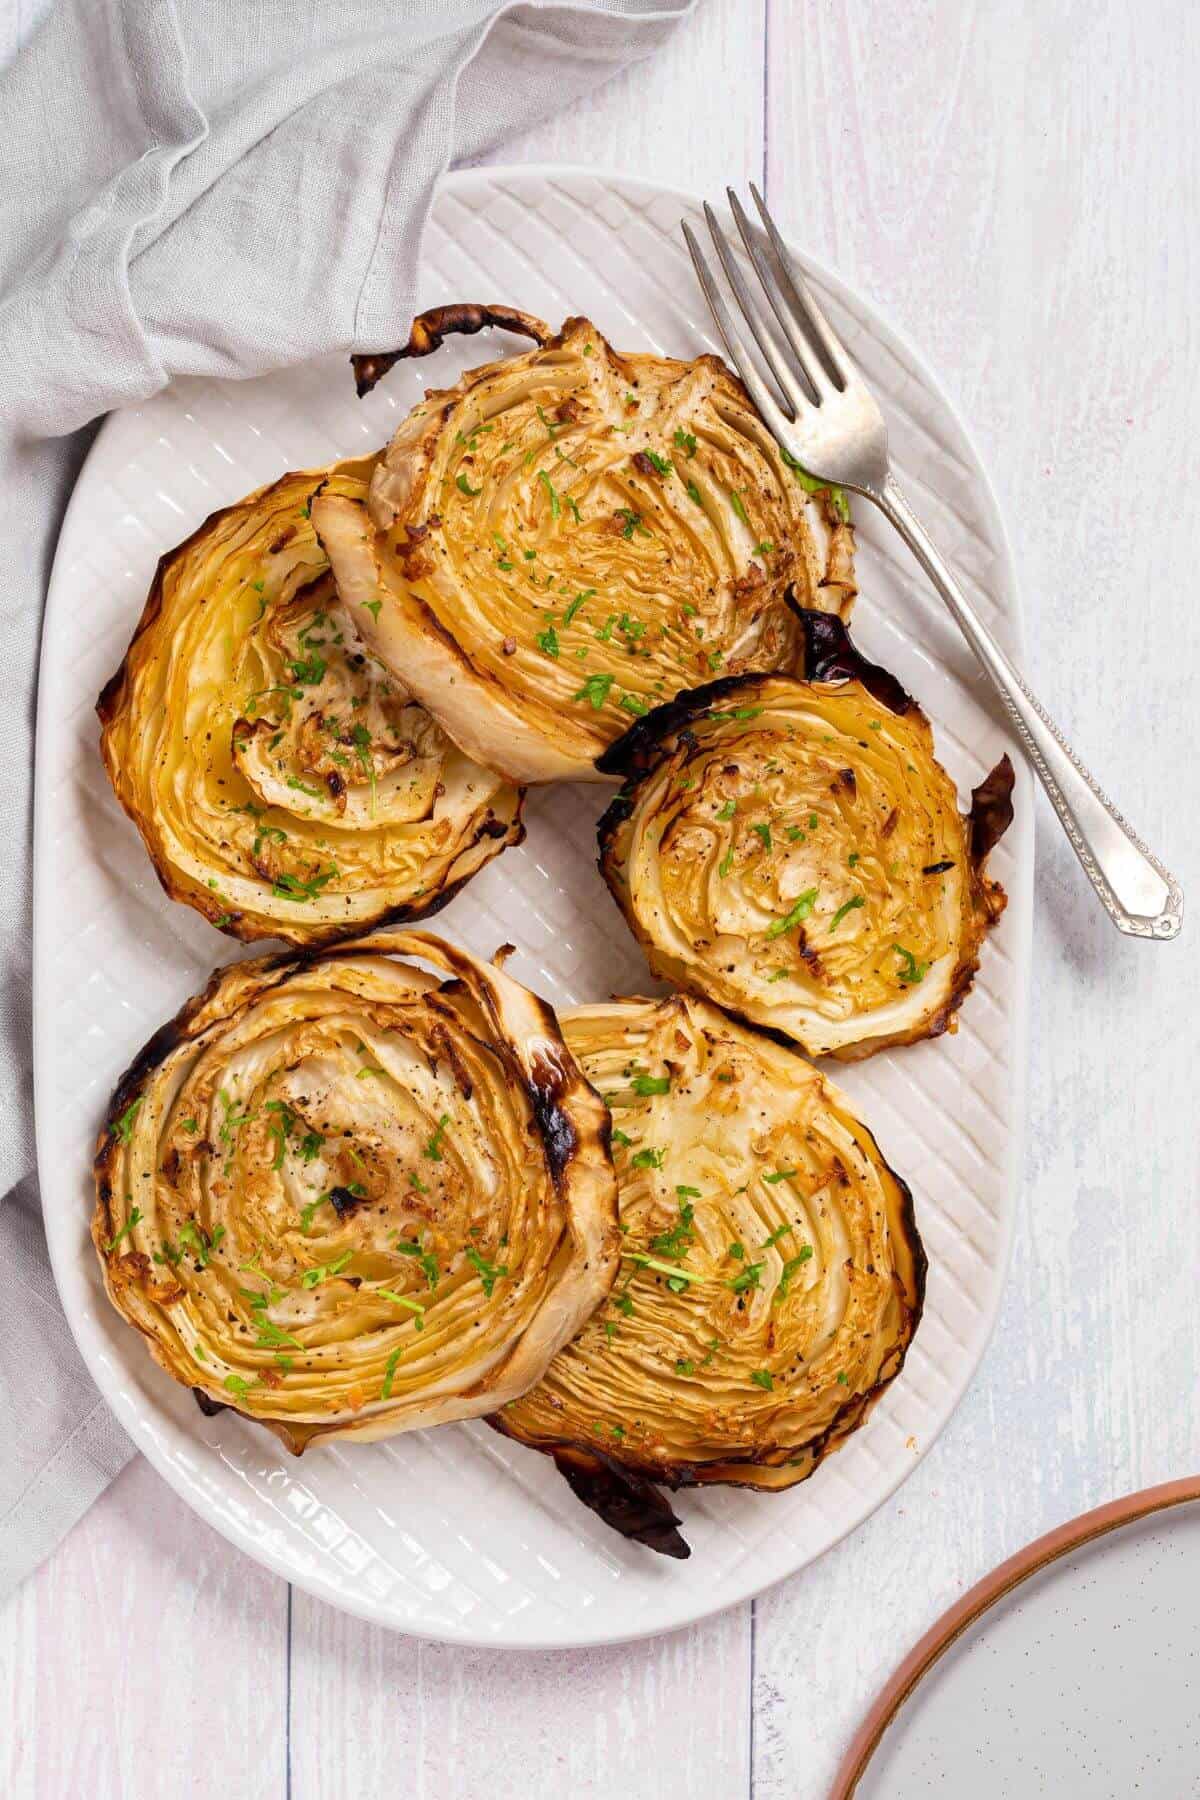 Roasted cabbage steaks on platter with fork.